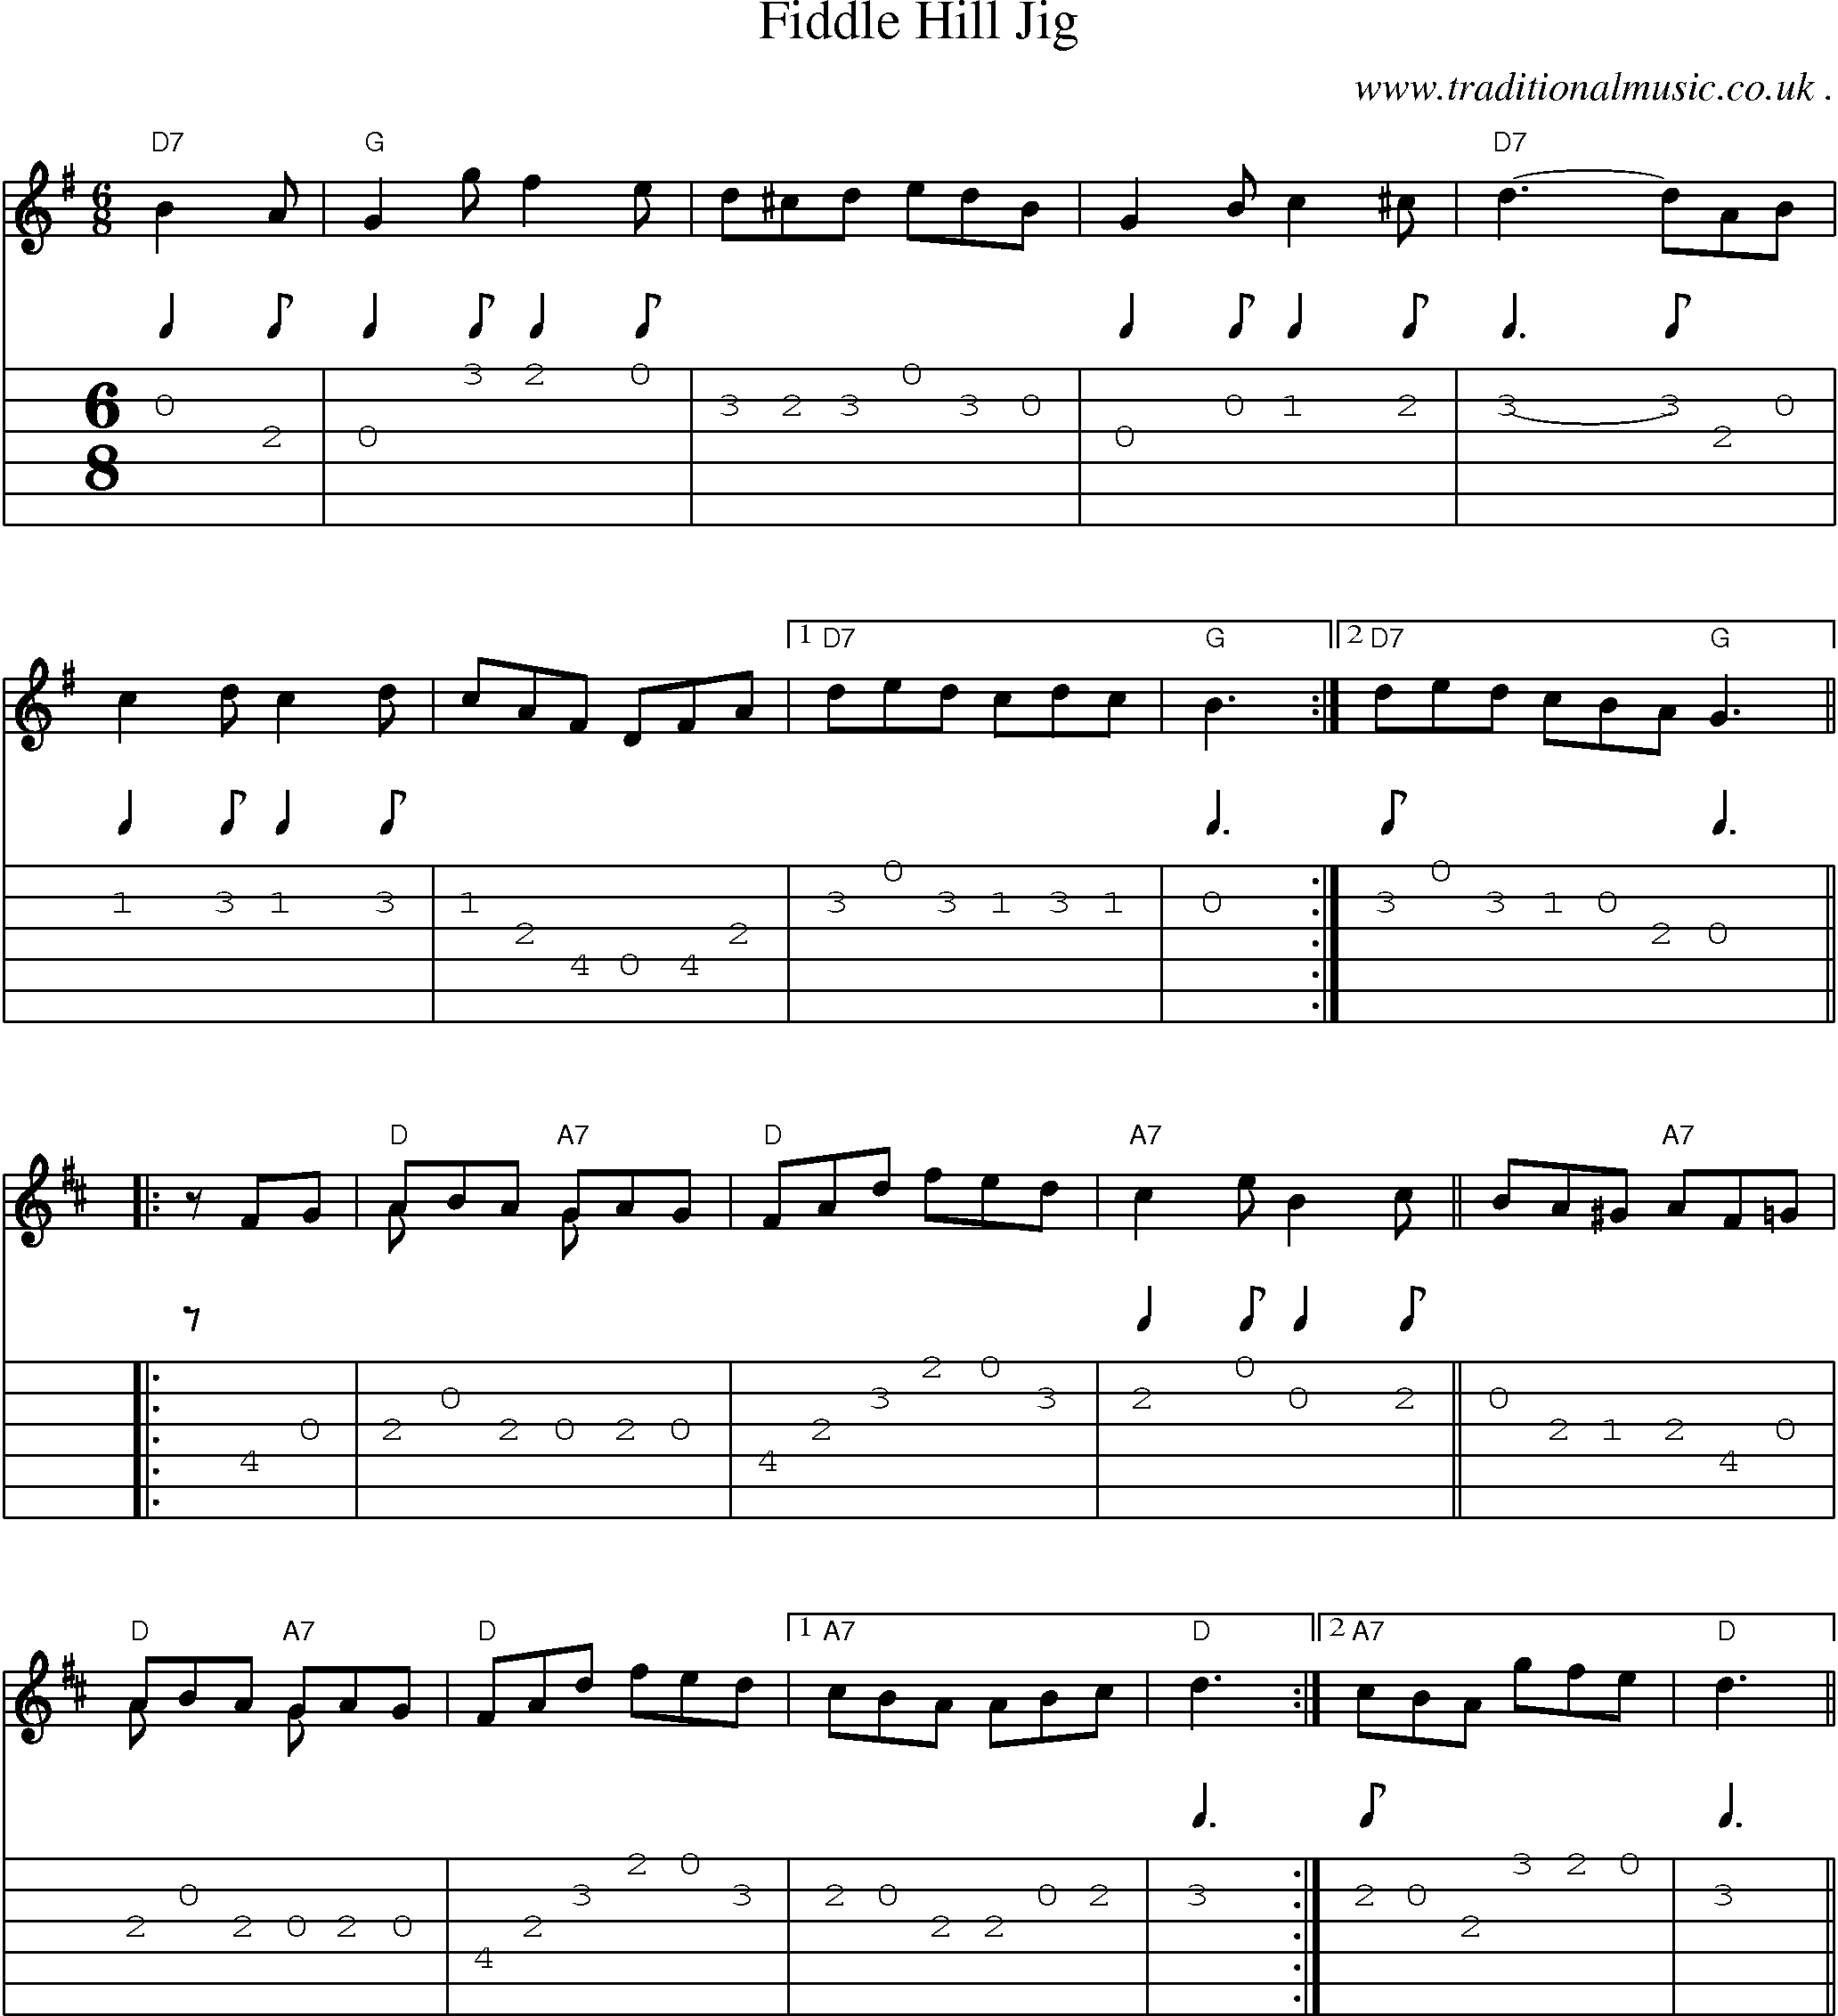 Music Score and Guitar Tabs for Fiddle Hill Jig